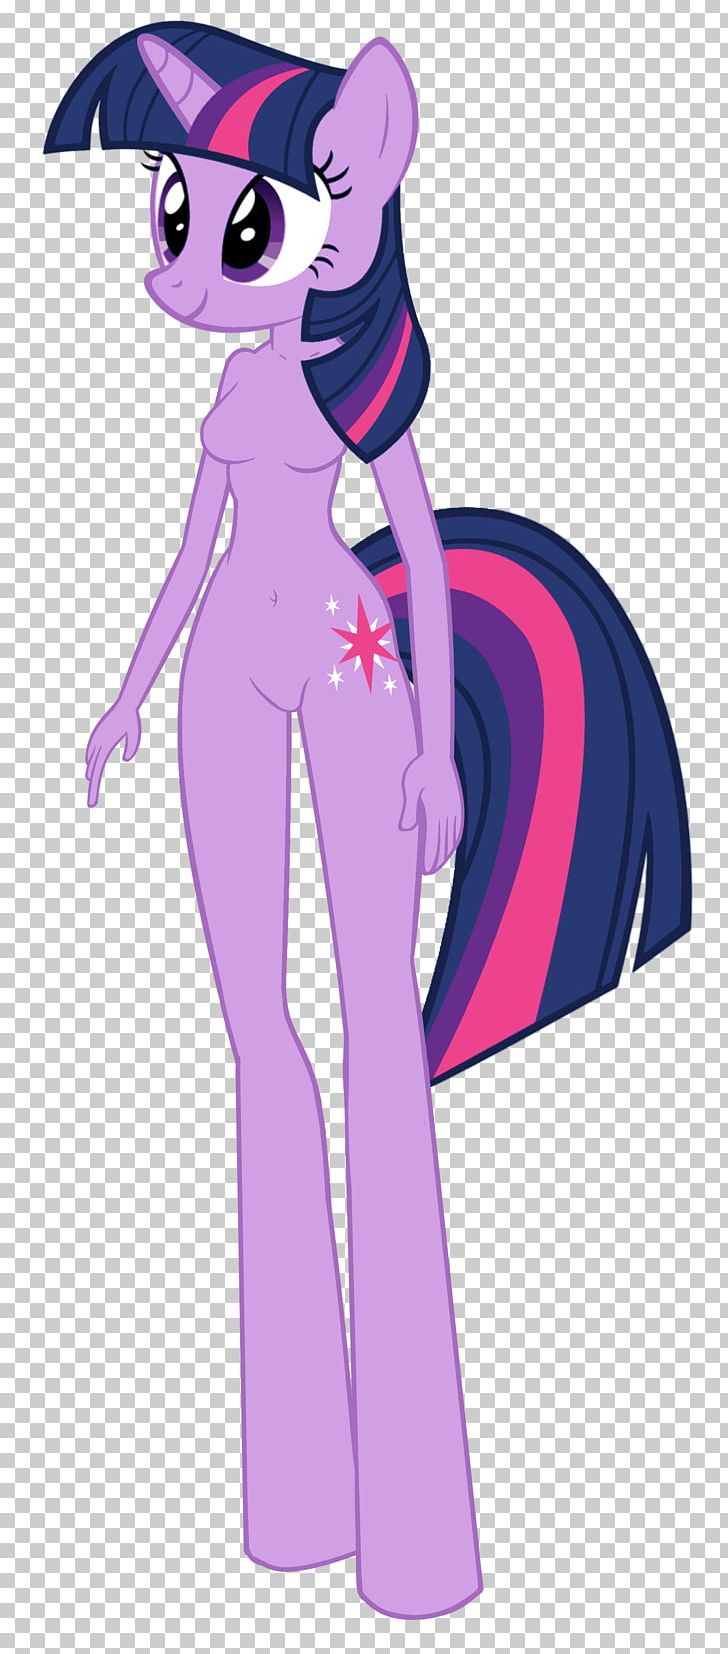 Twilight Sparkle Pony Barbie Toy Winged Unicorn PNG, Clipart, Art, Cartoon, Doll, Equestria, Fictional Character Free PNG Download